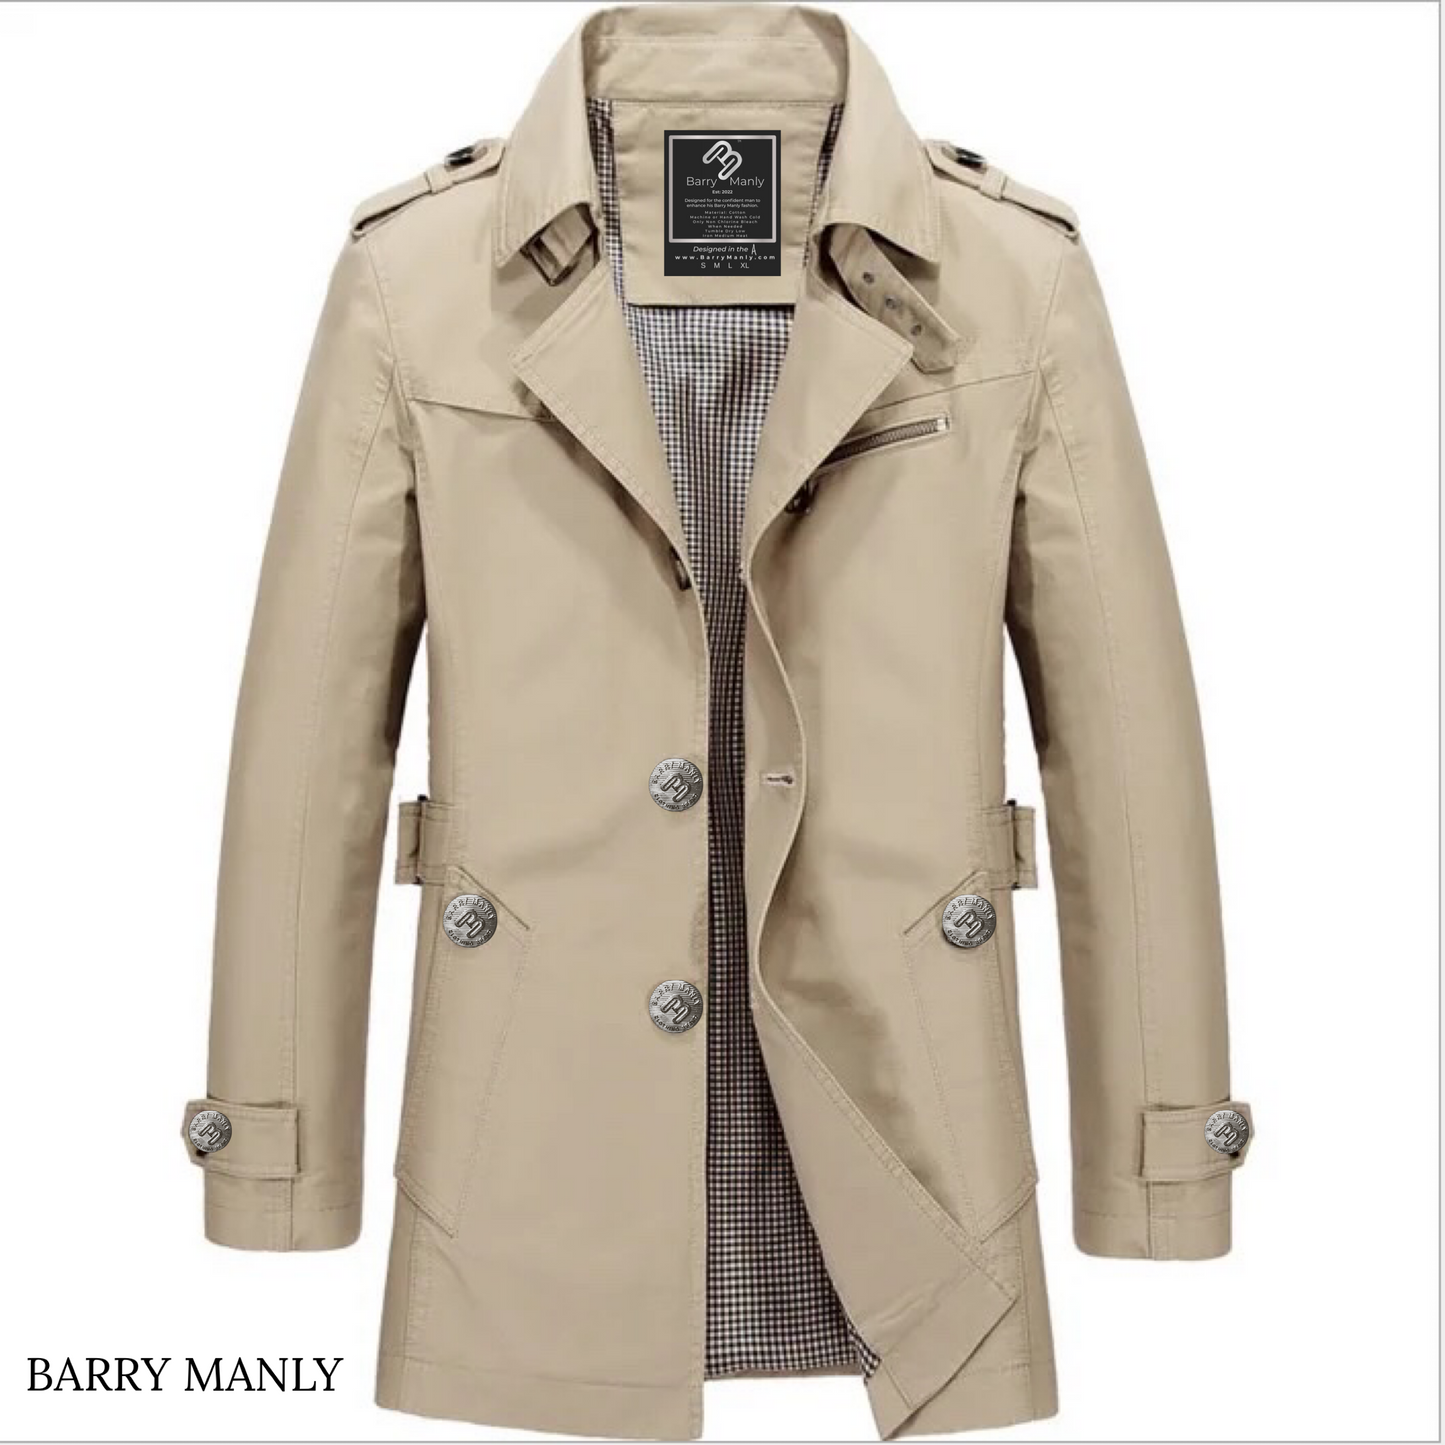 Barry Manly Jerry Coat